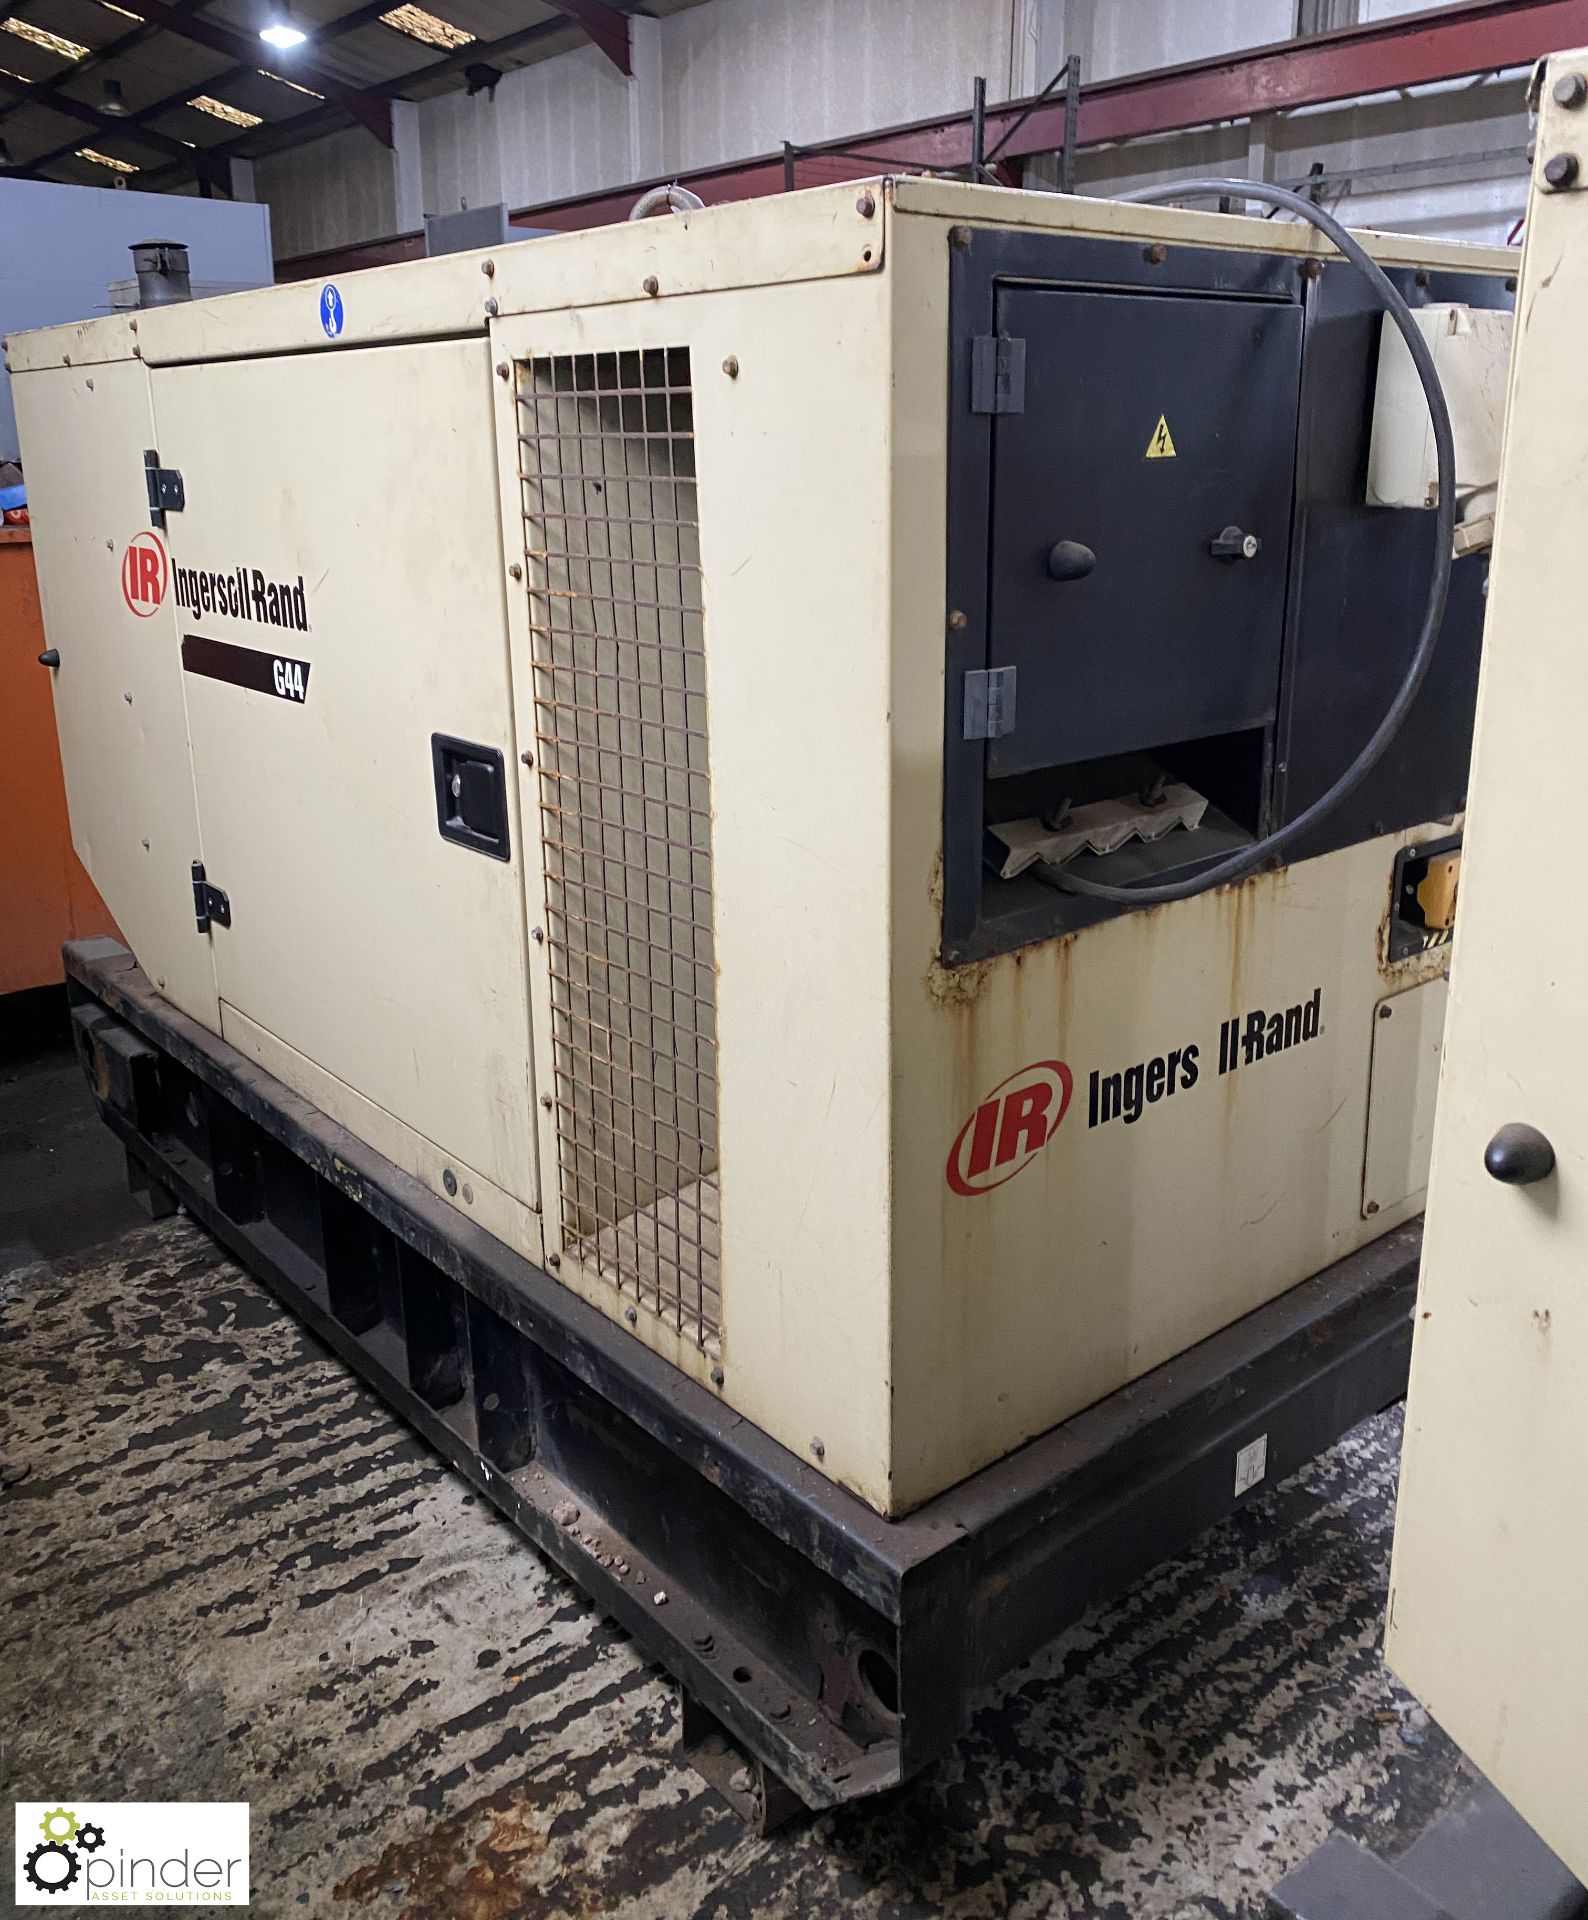 Ingersoll Rand G44 skid mounted Generator Set, 44kva, 37176hours, with acoustic cabinet - Image 3 of 11